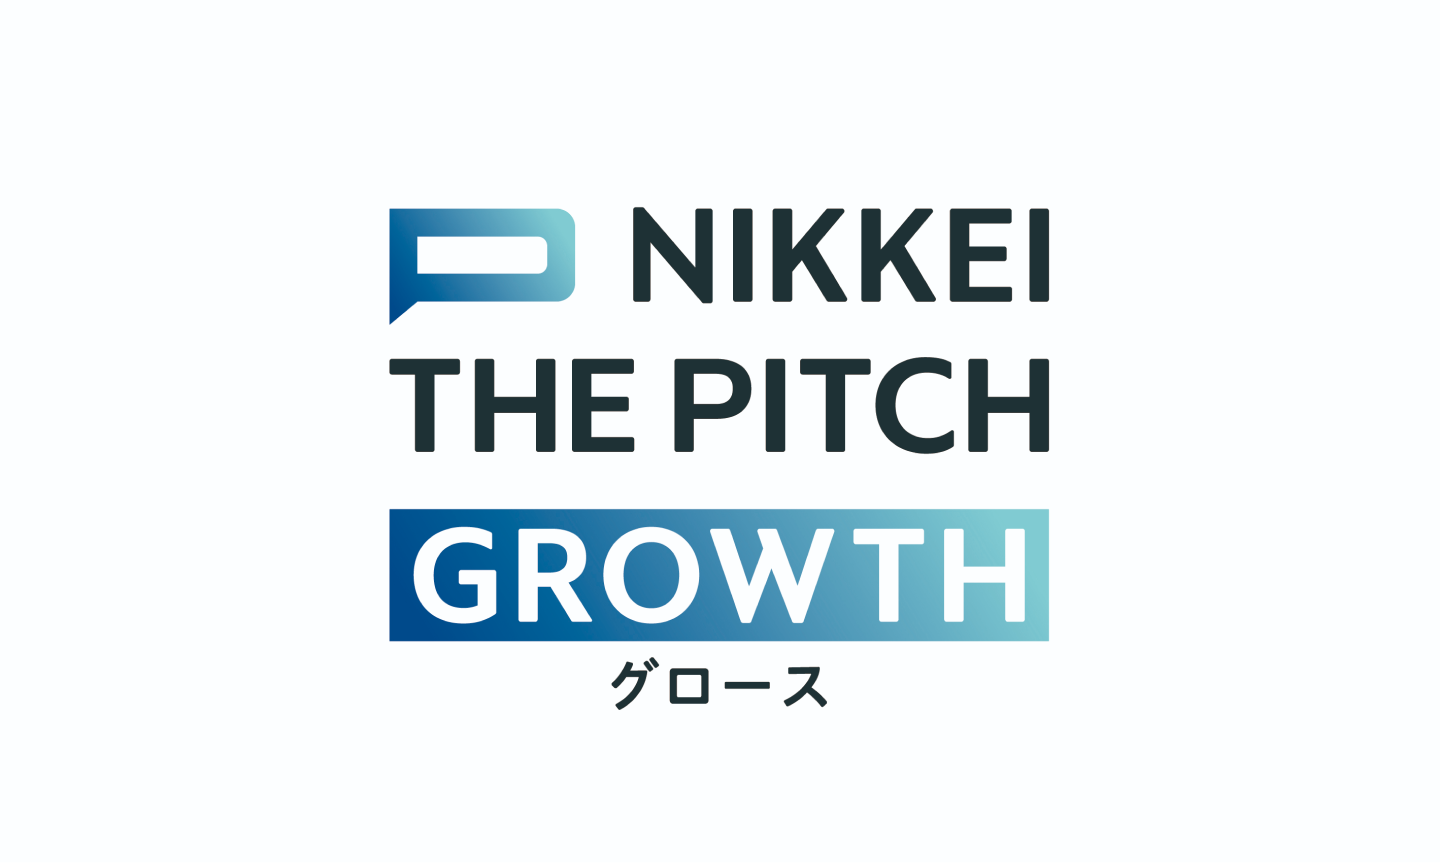 NIKKEI THE PITCH GROWTH ～スタートアップ/アトツギベンチャー企業支援プロジェクト～